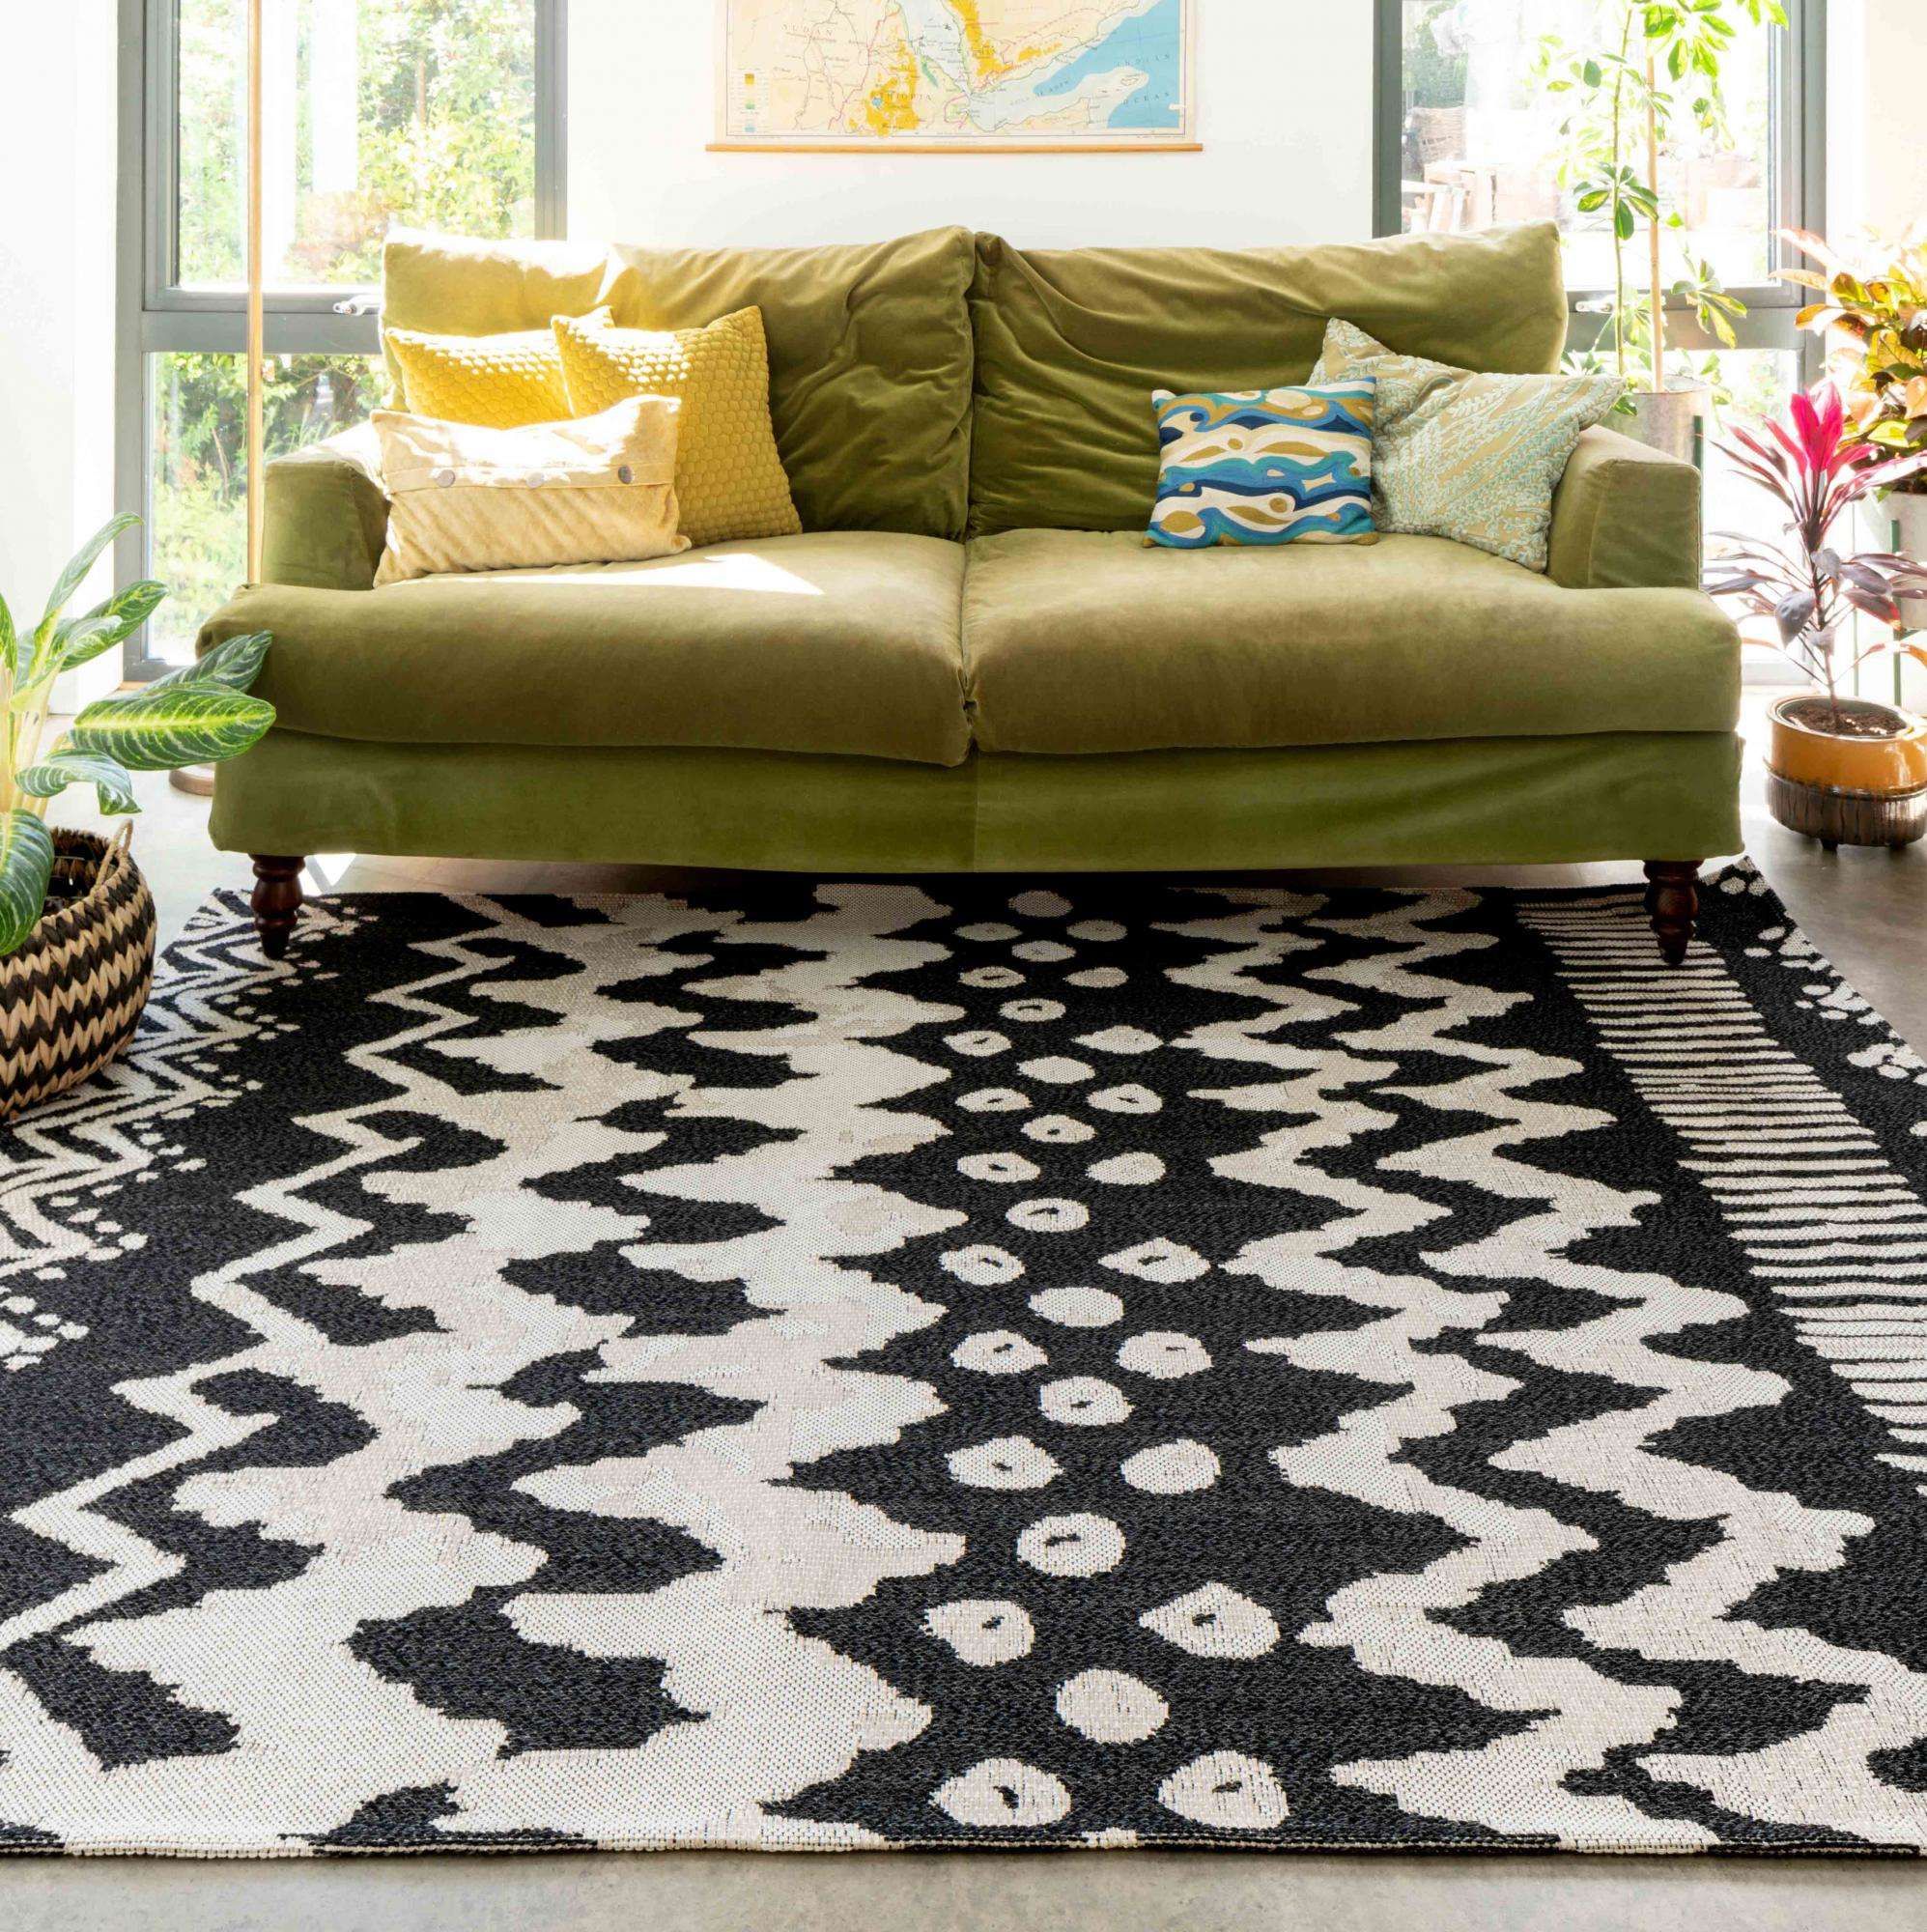 Rustic Chic Black White Woven Sustainable Recycled Cotton Rug | Kendall |  Kukoon Rugs Online Throughout Black And White Rugs (View 8 of 15)